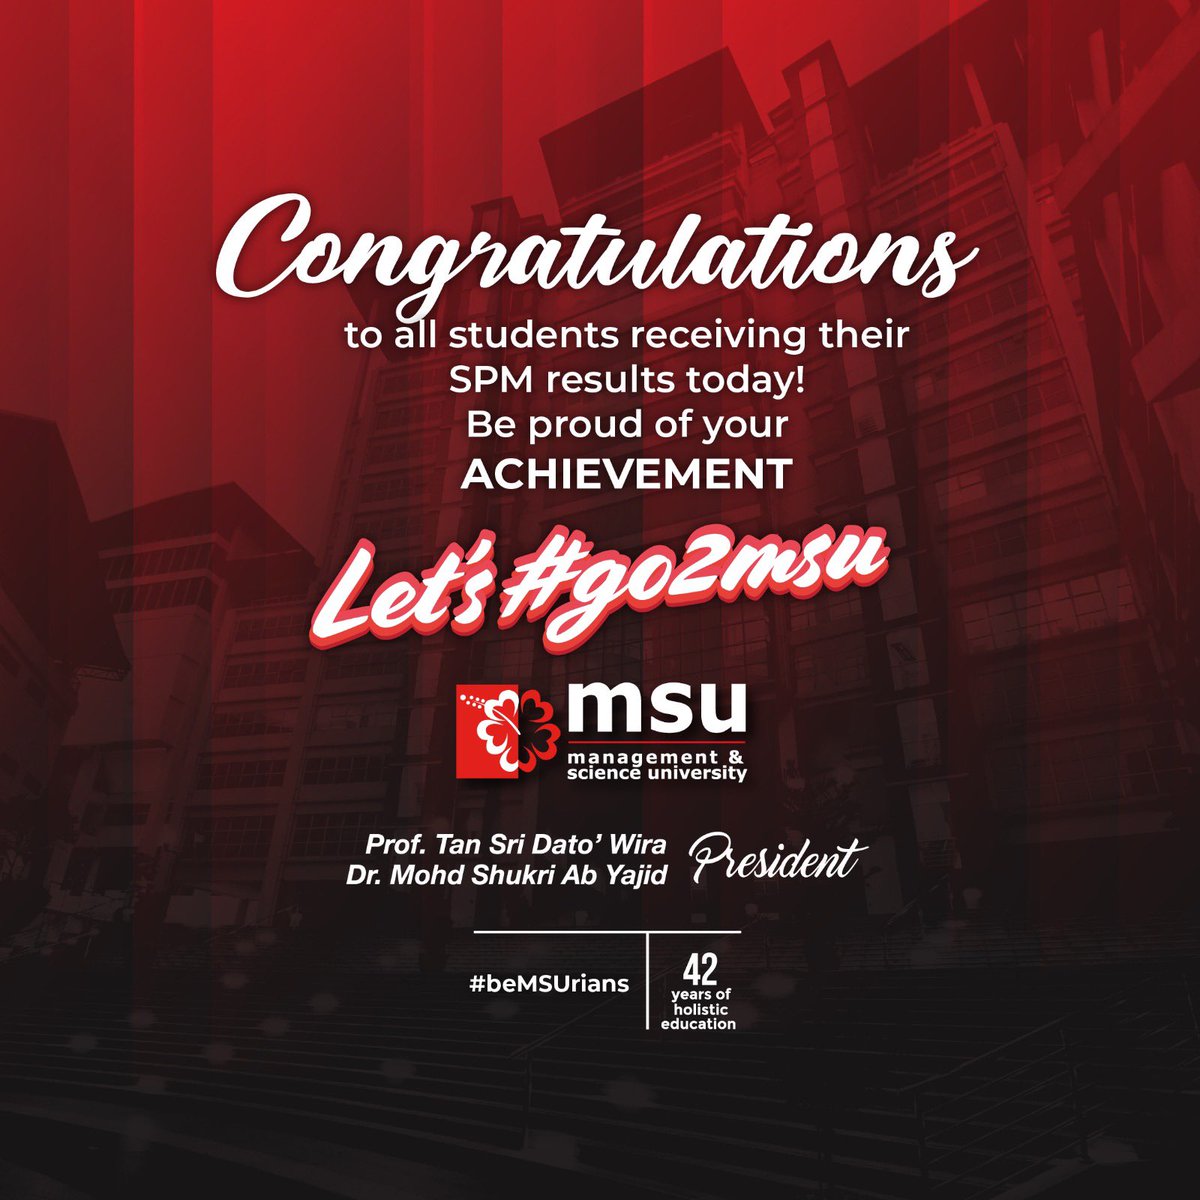 All the best & congrats to all the #SPM2022 candidates! You've come this far, so keep going and achieve further success. We are proud of you! @MSUmalaysia @MSUcollege @YayasanMSU